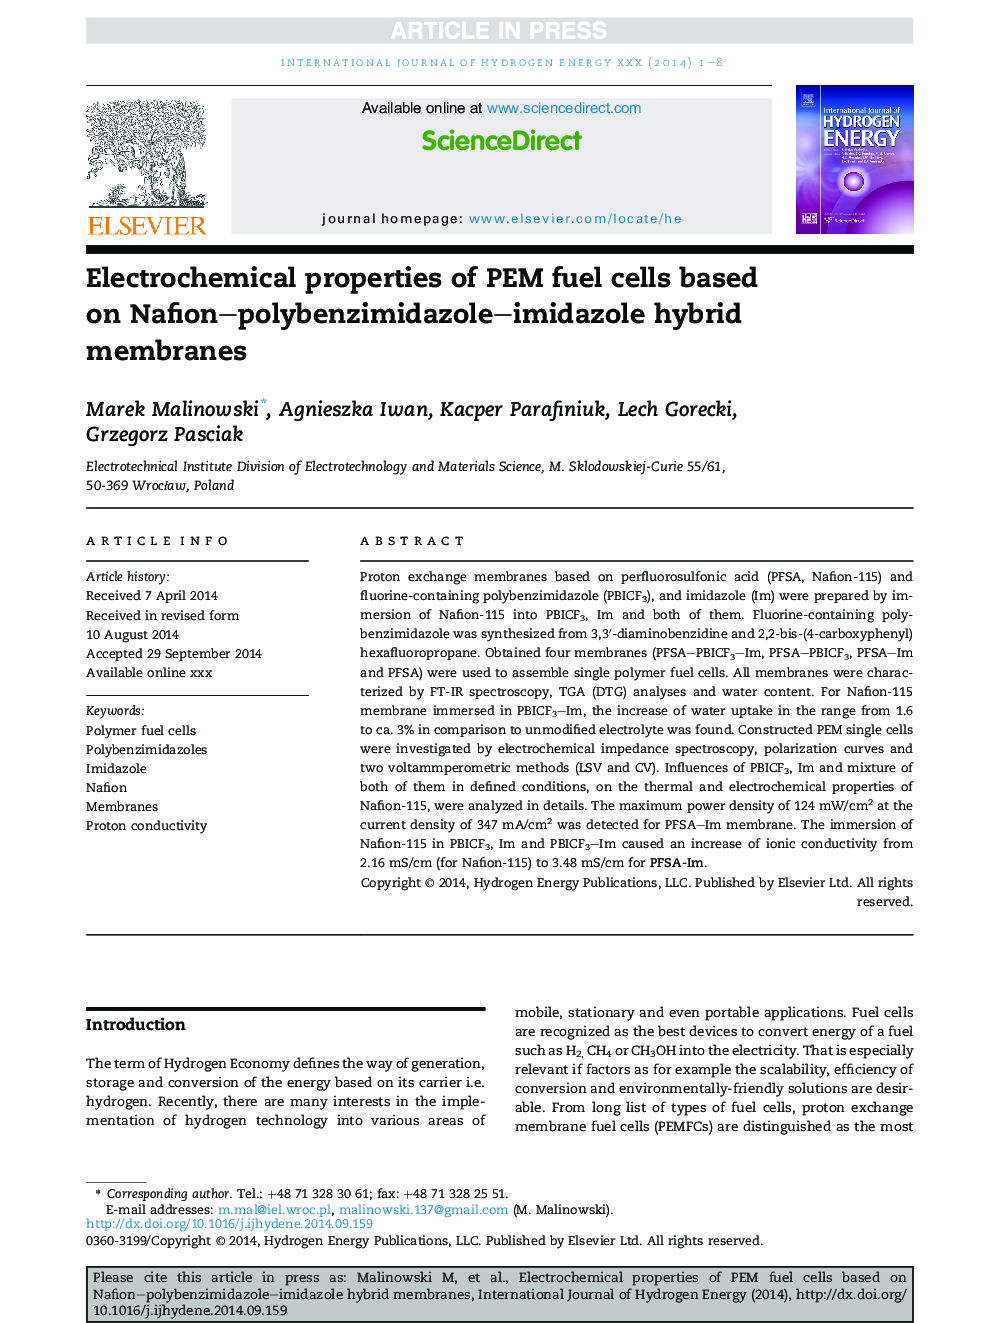 Electrochemical properties of PEM fuel cells based on Nafion-polybenzimidazole-imidazole hybrid membranes